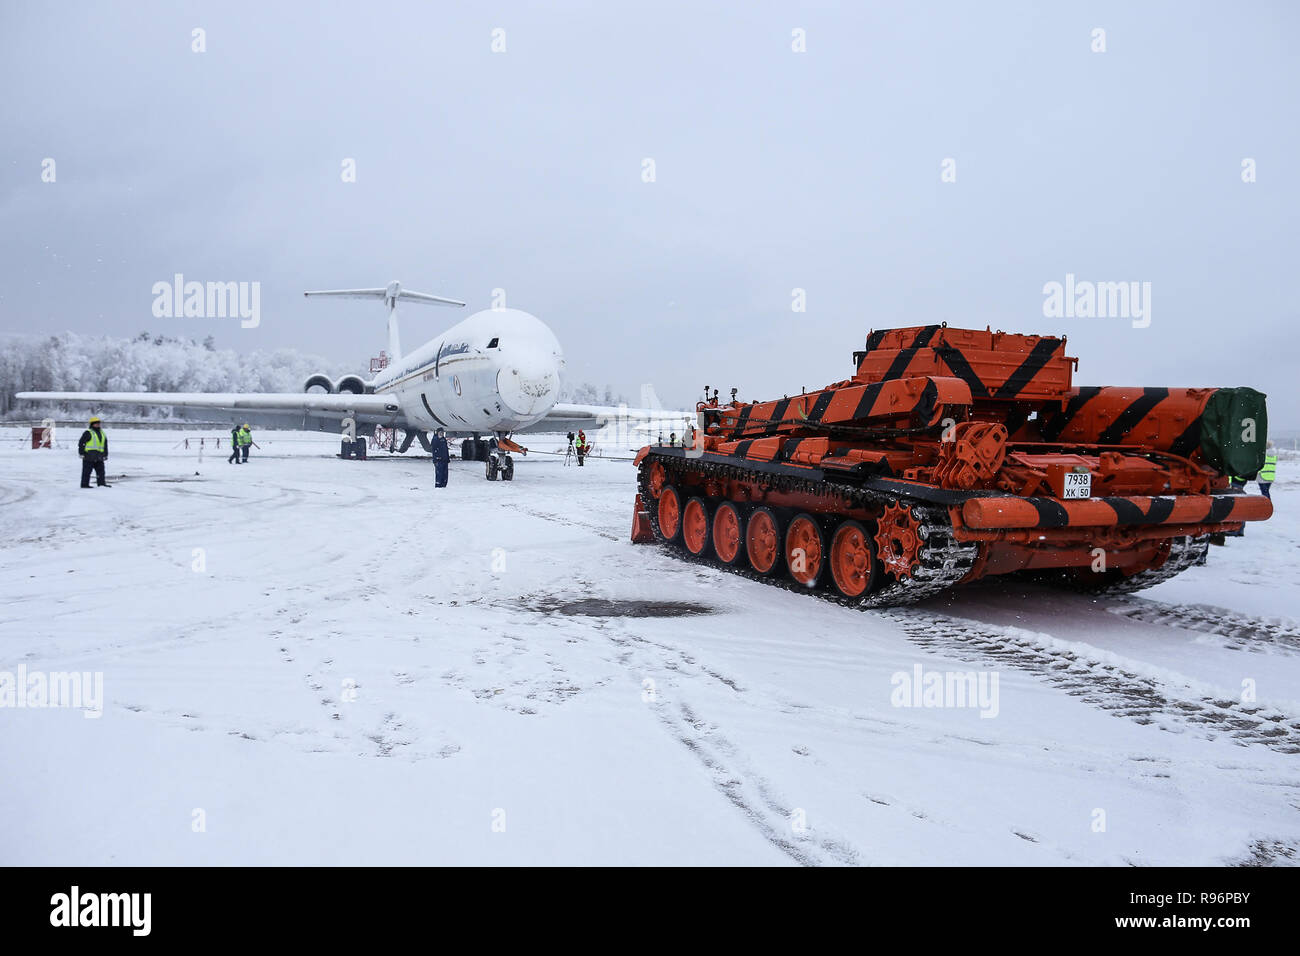 Beijing, Russia. 19th Dec, 2018. An armoured recovery vehicle shows its performance at Domodedovo Airport in Moscow, Russia, on Dec. 19, 2018. The armoured recovery vehicle is able to tow a weight of 125 tons or double-decked airplane through snow and forest area. Credit: Evgeny Sinitsyn/Xinhua/Alamy Live News Stock Photo